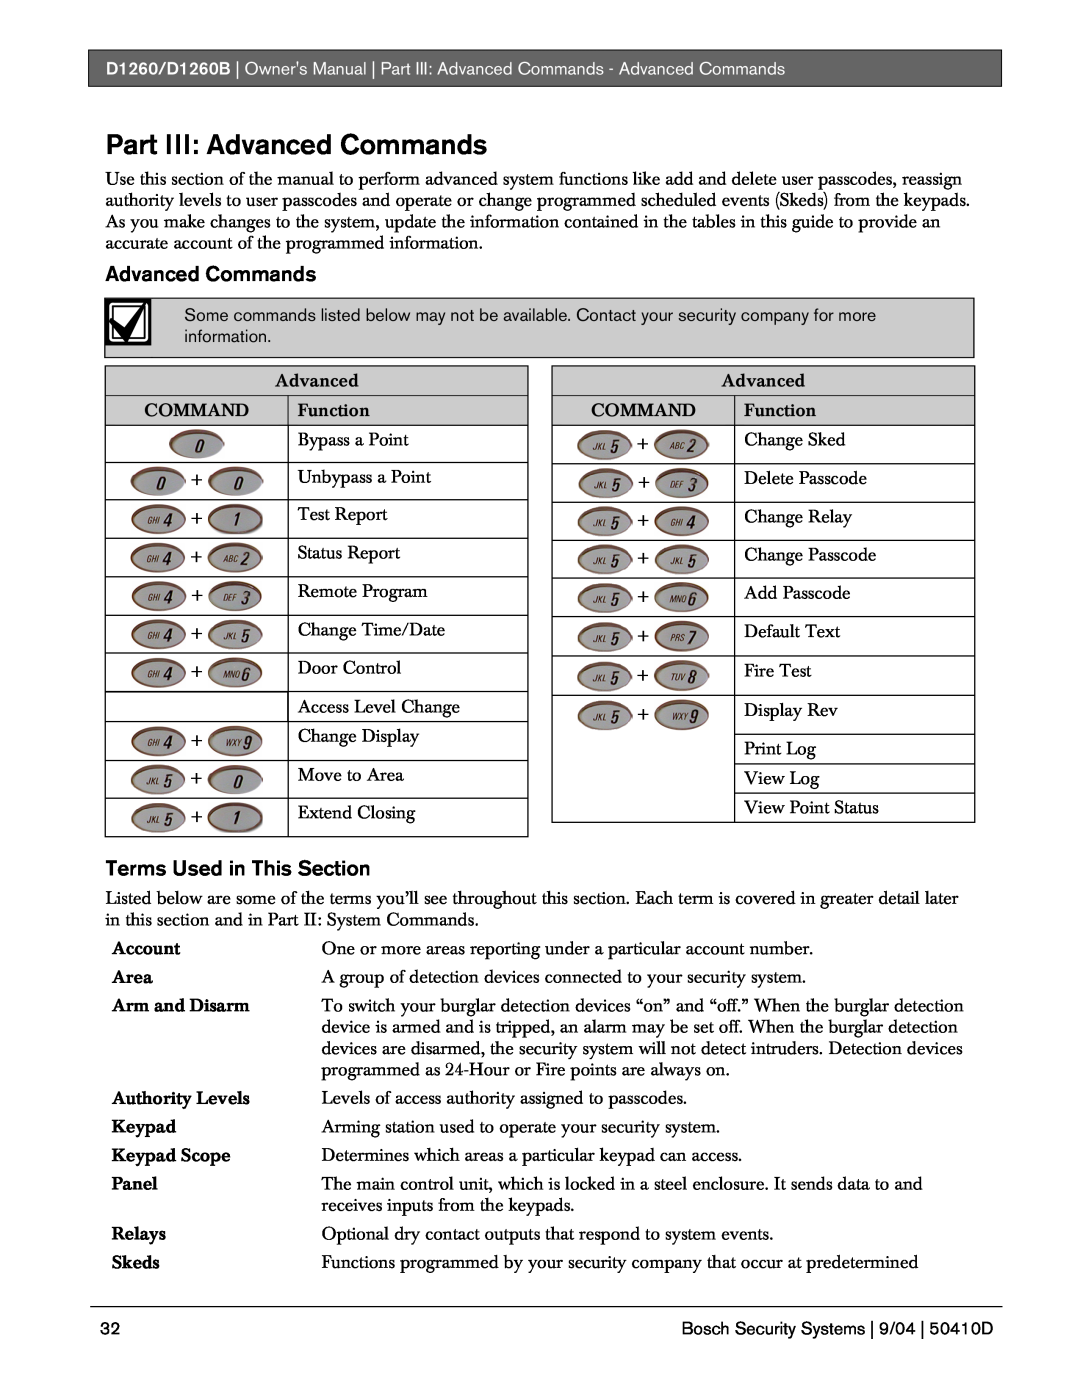 Bosch Appliances D1260B owner manual Part III: Advanced Commands, Terms Used in This Section 